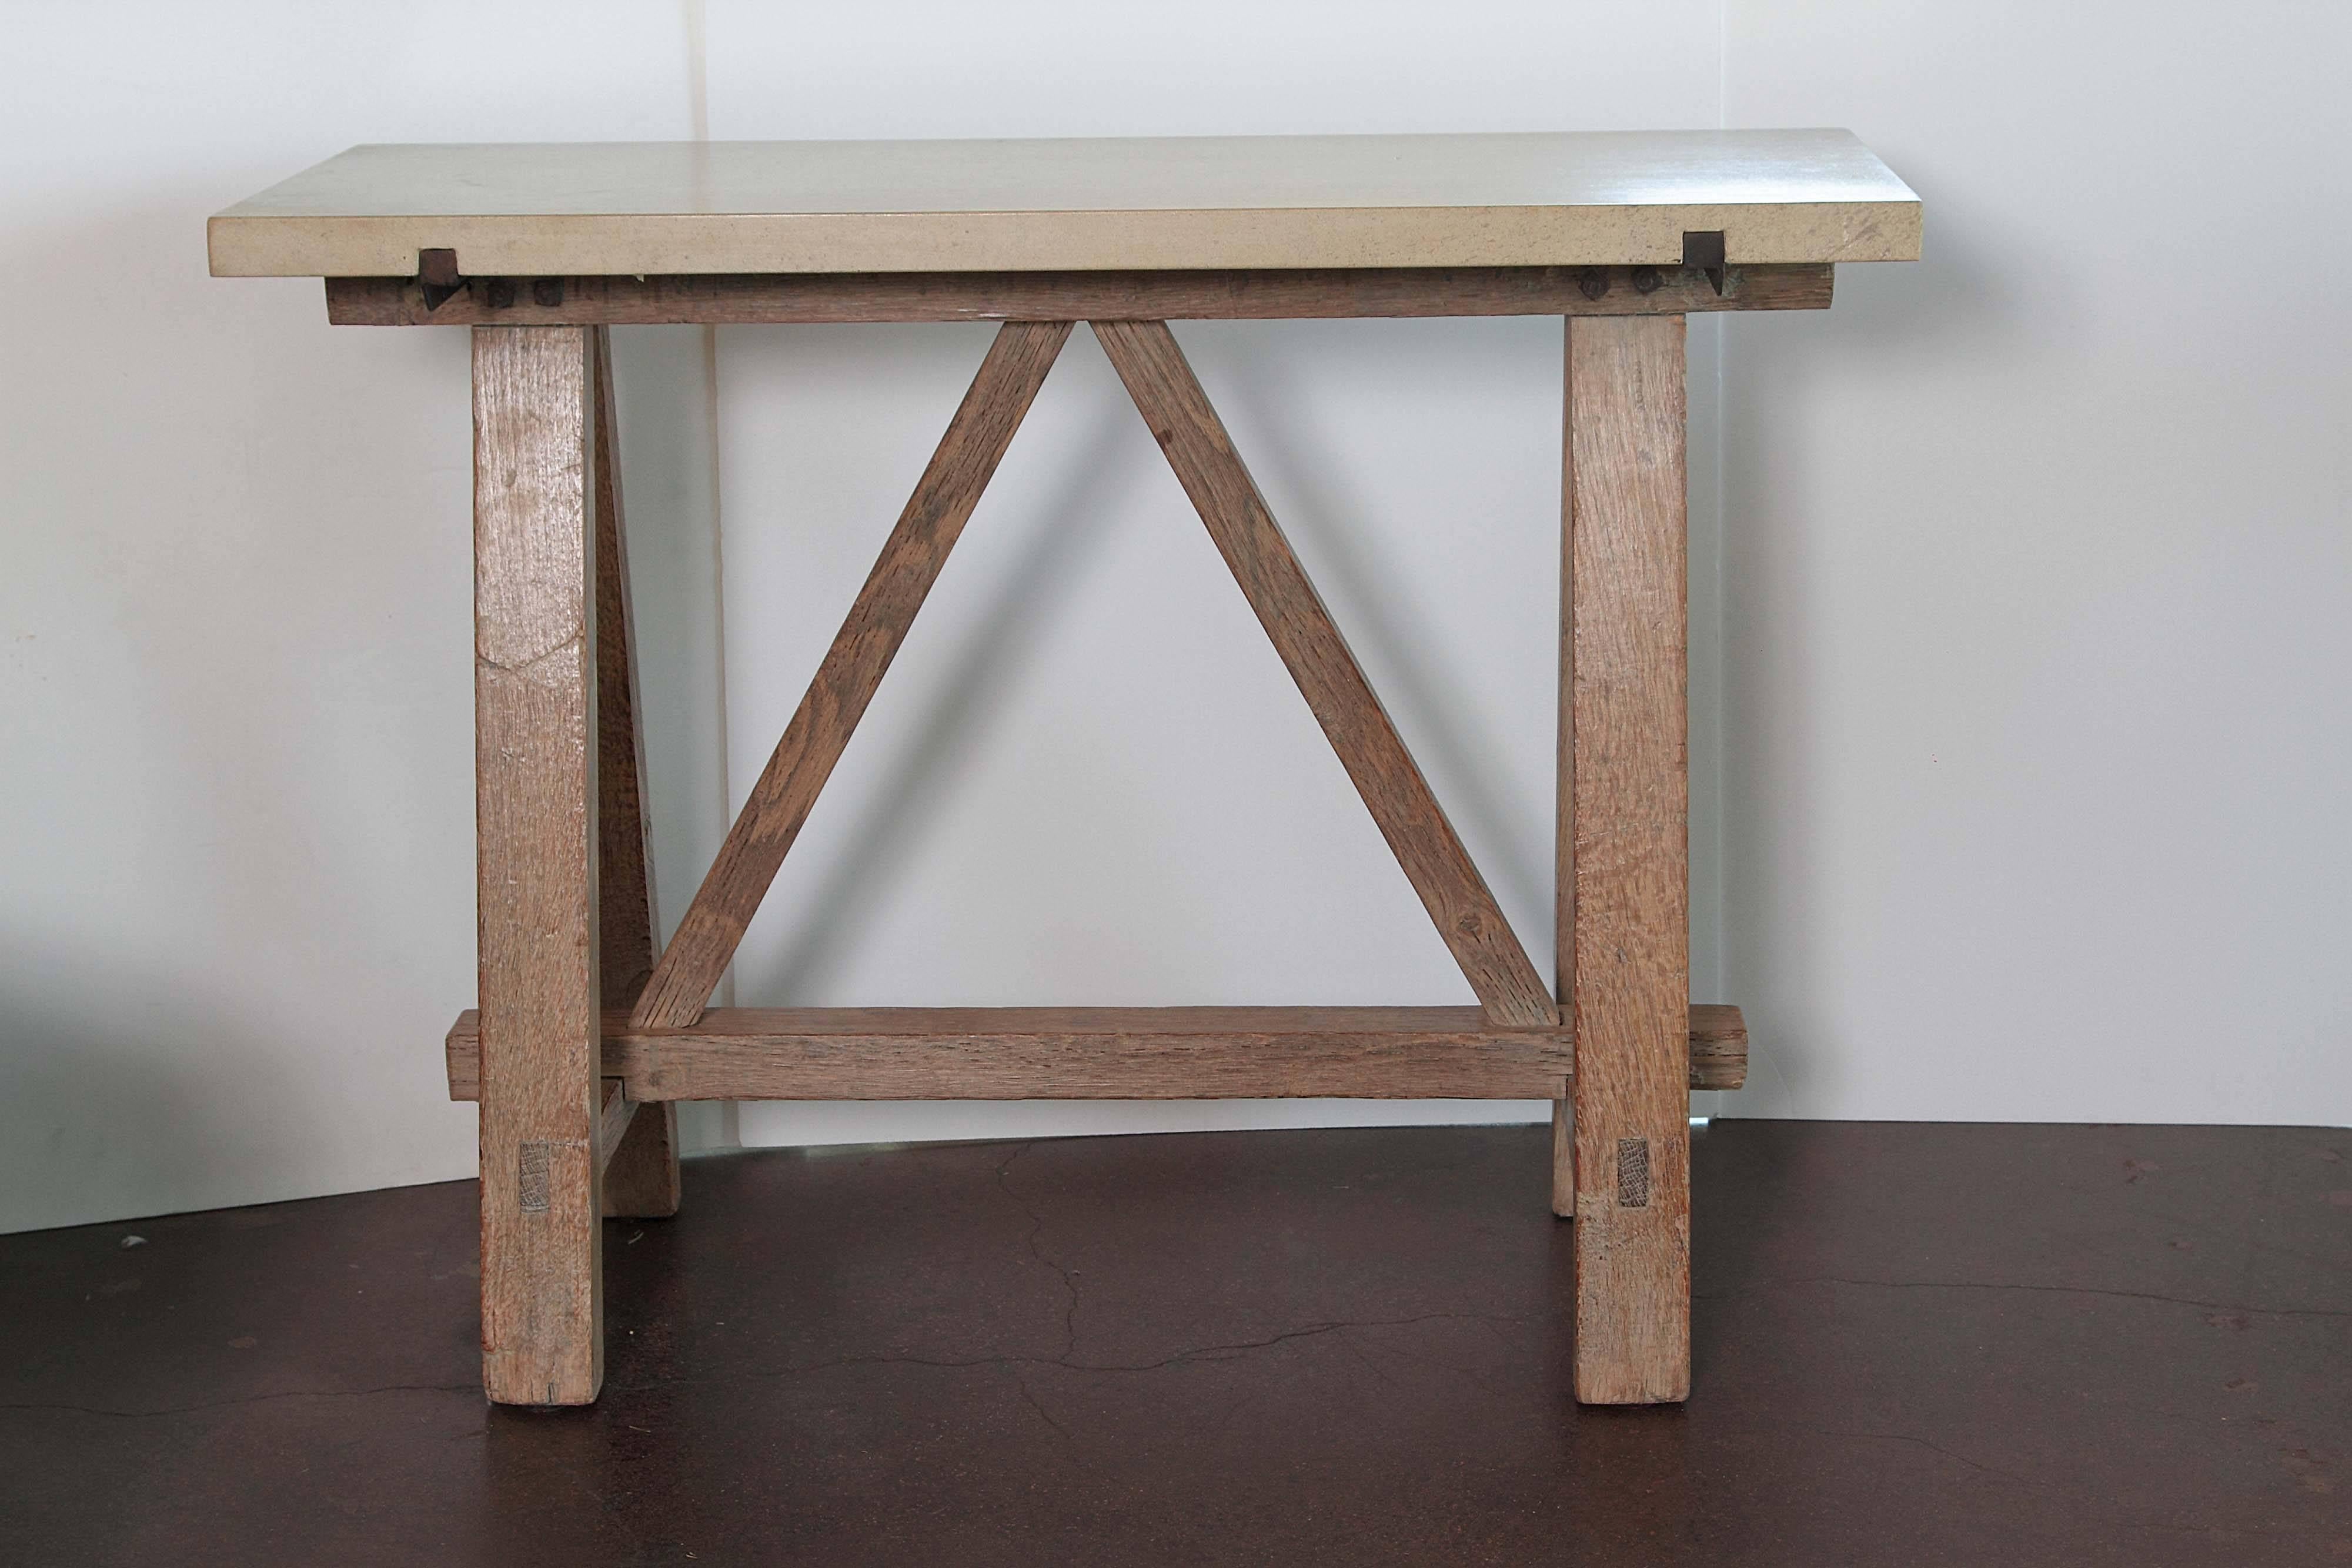 Whether used as a workbench or to help cut the lumber for the French railway systems, these sawhorses was used as a progressive tool in history. 

Antique oak in natural blond tone coloration with upside down 